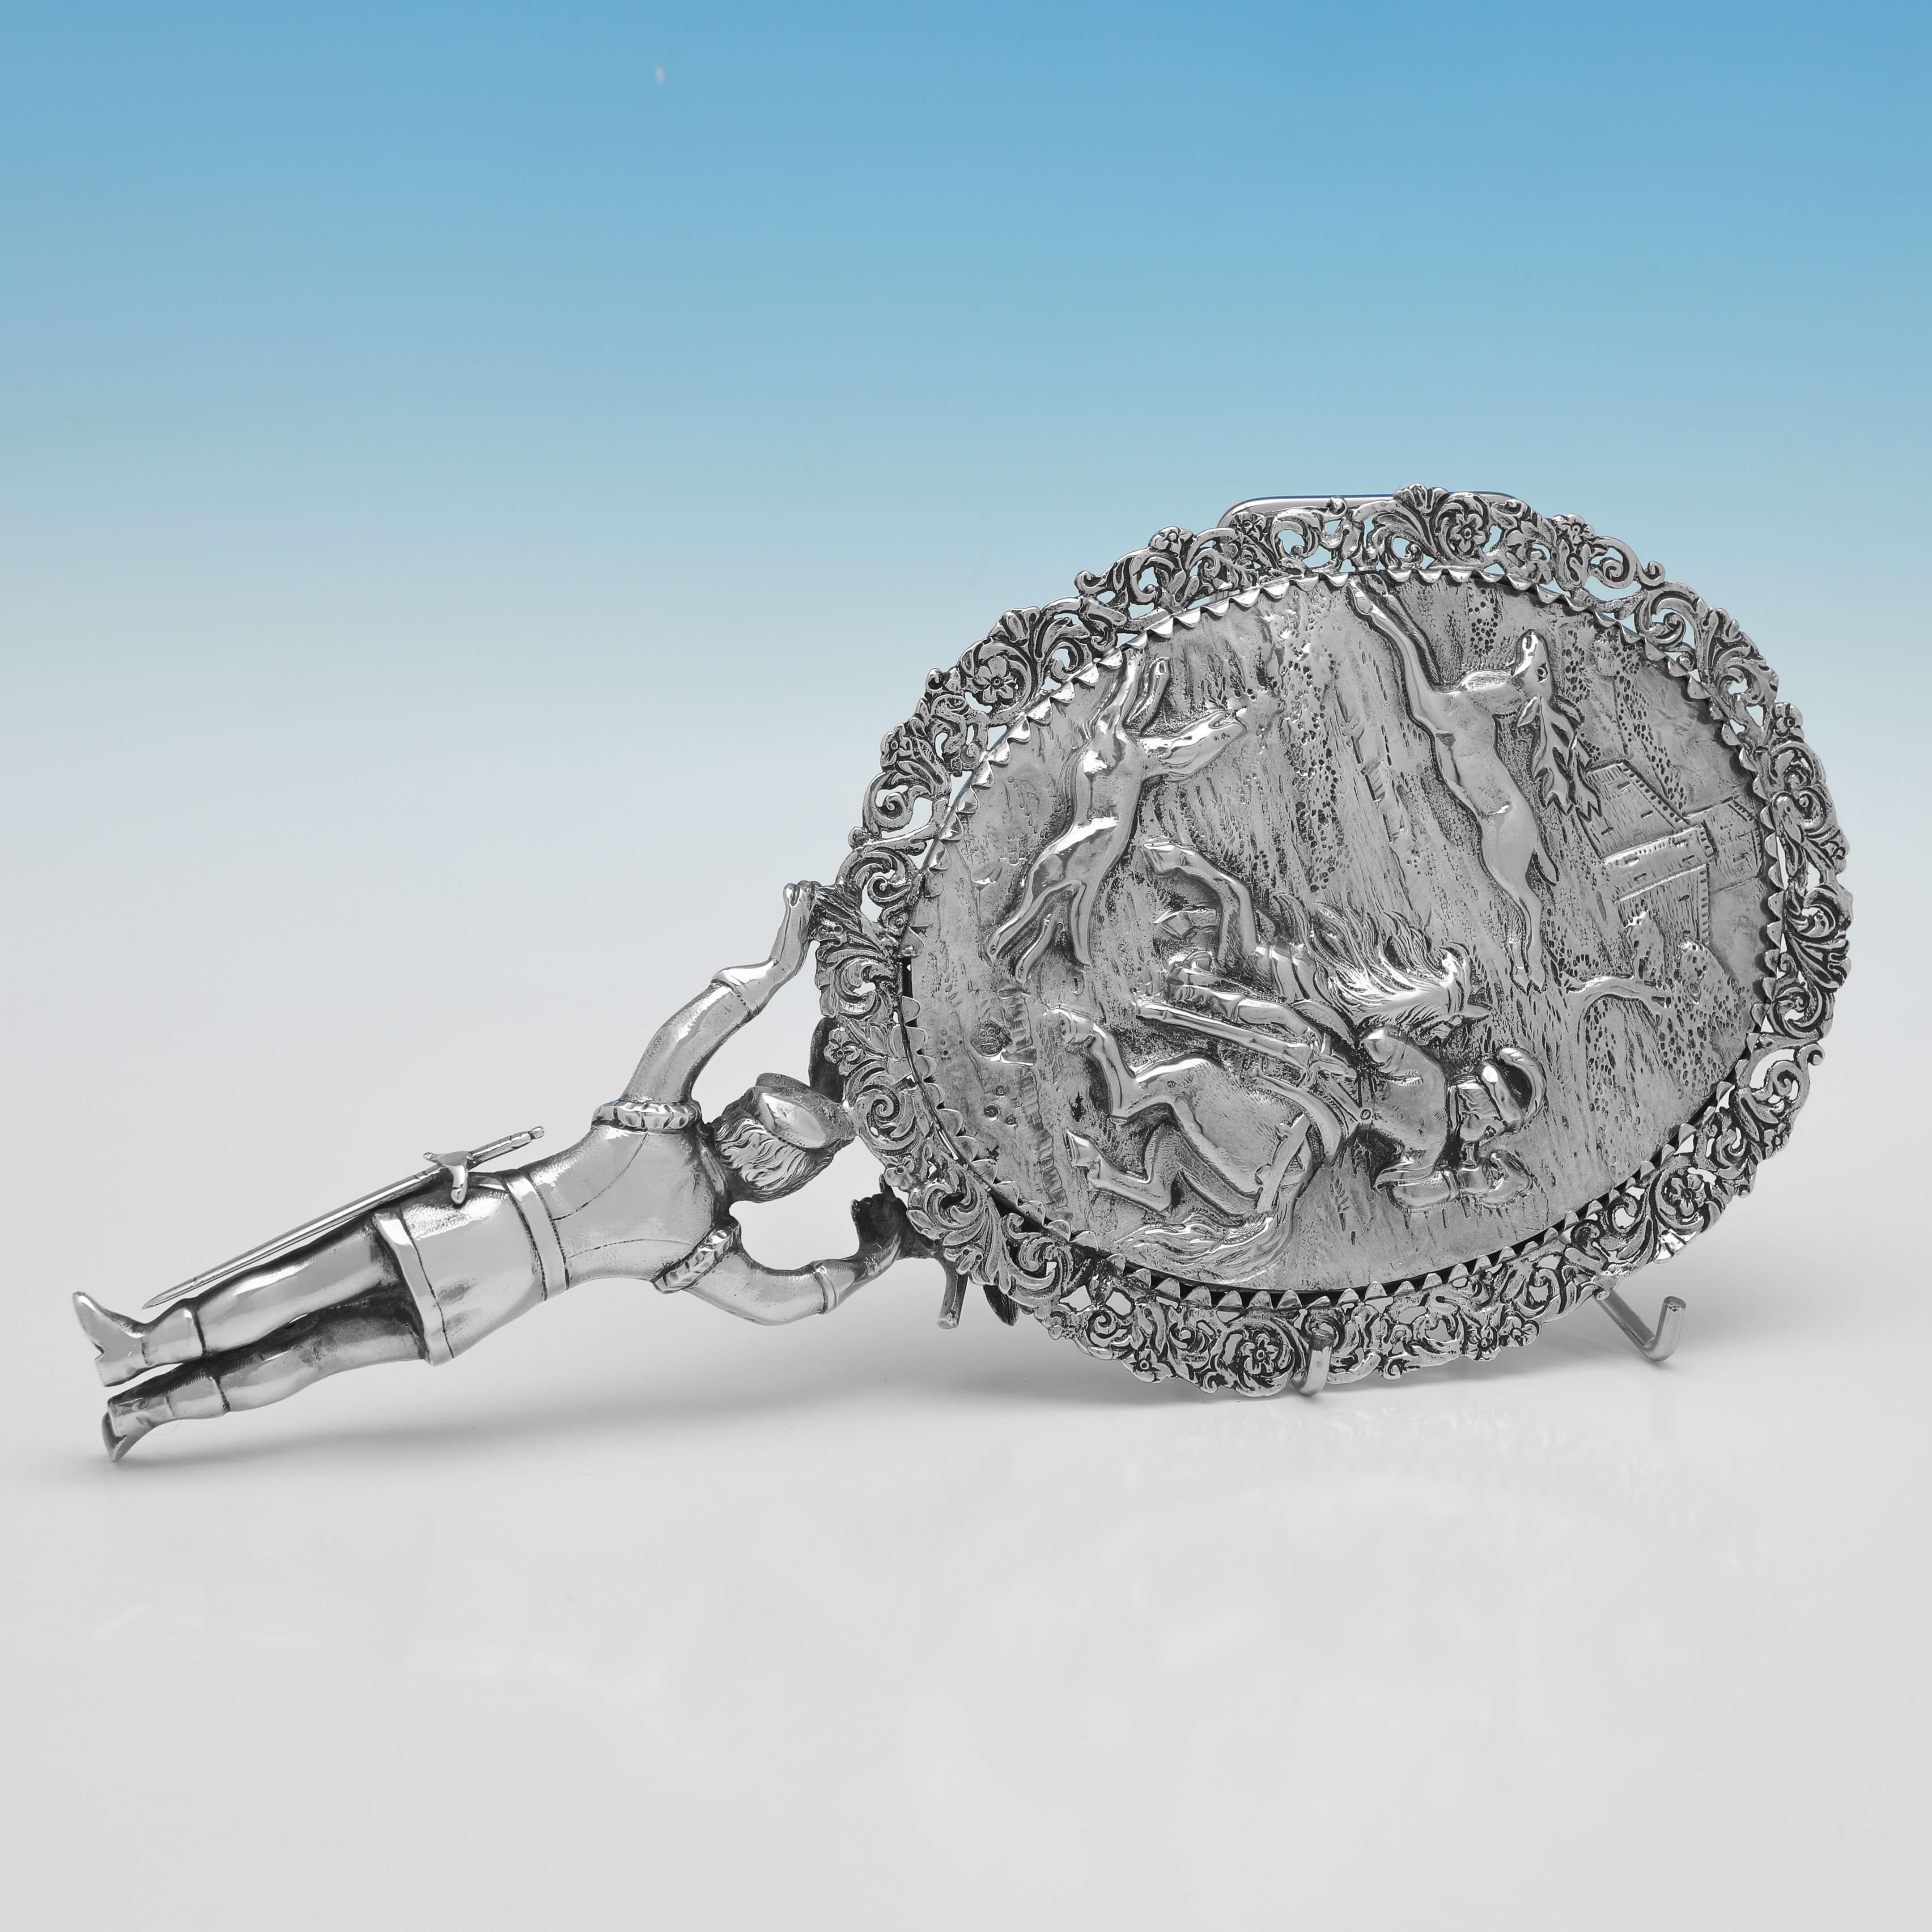 Hallmarked in London in 1882 by Edward Brown, this charming, Antique, Sterling Silver Hand Mirror, features a figural handle, and a chased scene to the reverse. 

The hand mirror measures 10.5